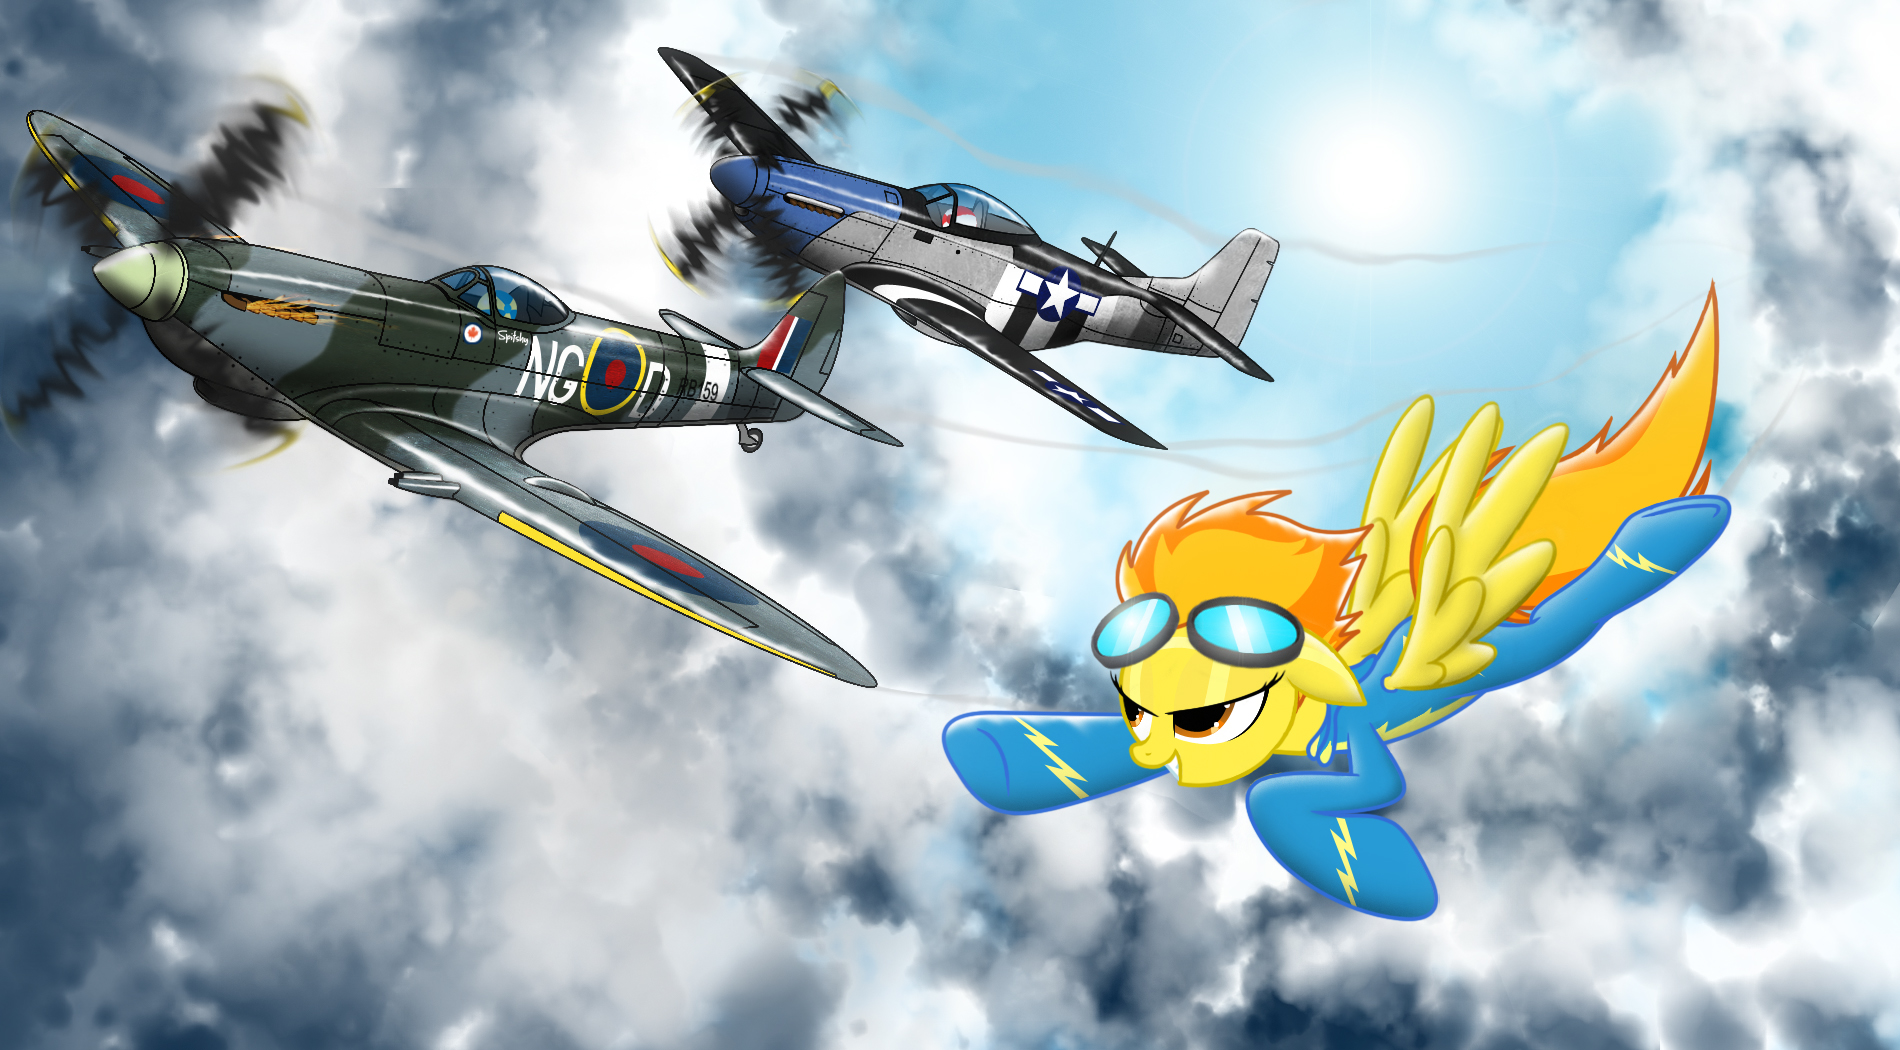 Spitfire flying with vintage friends